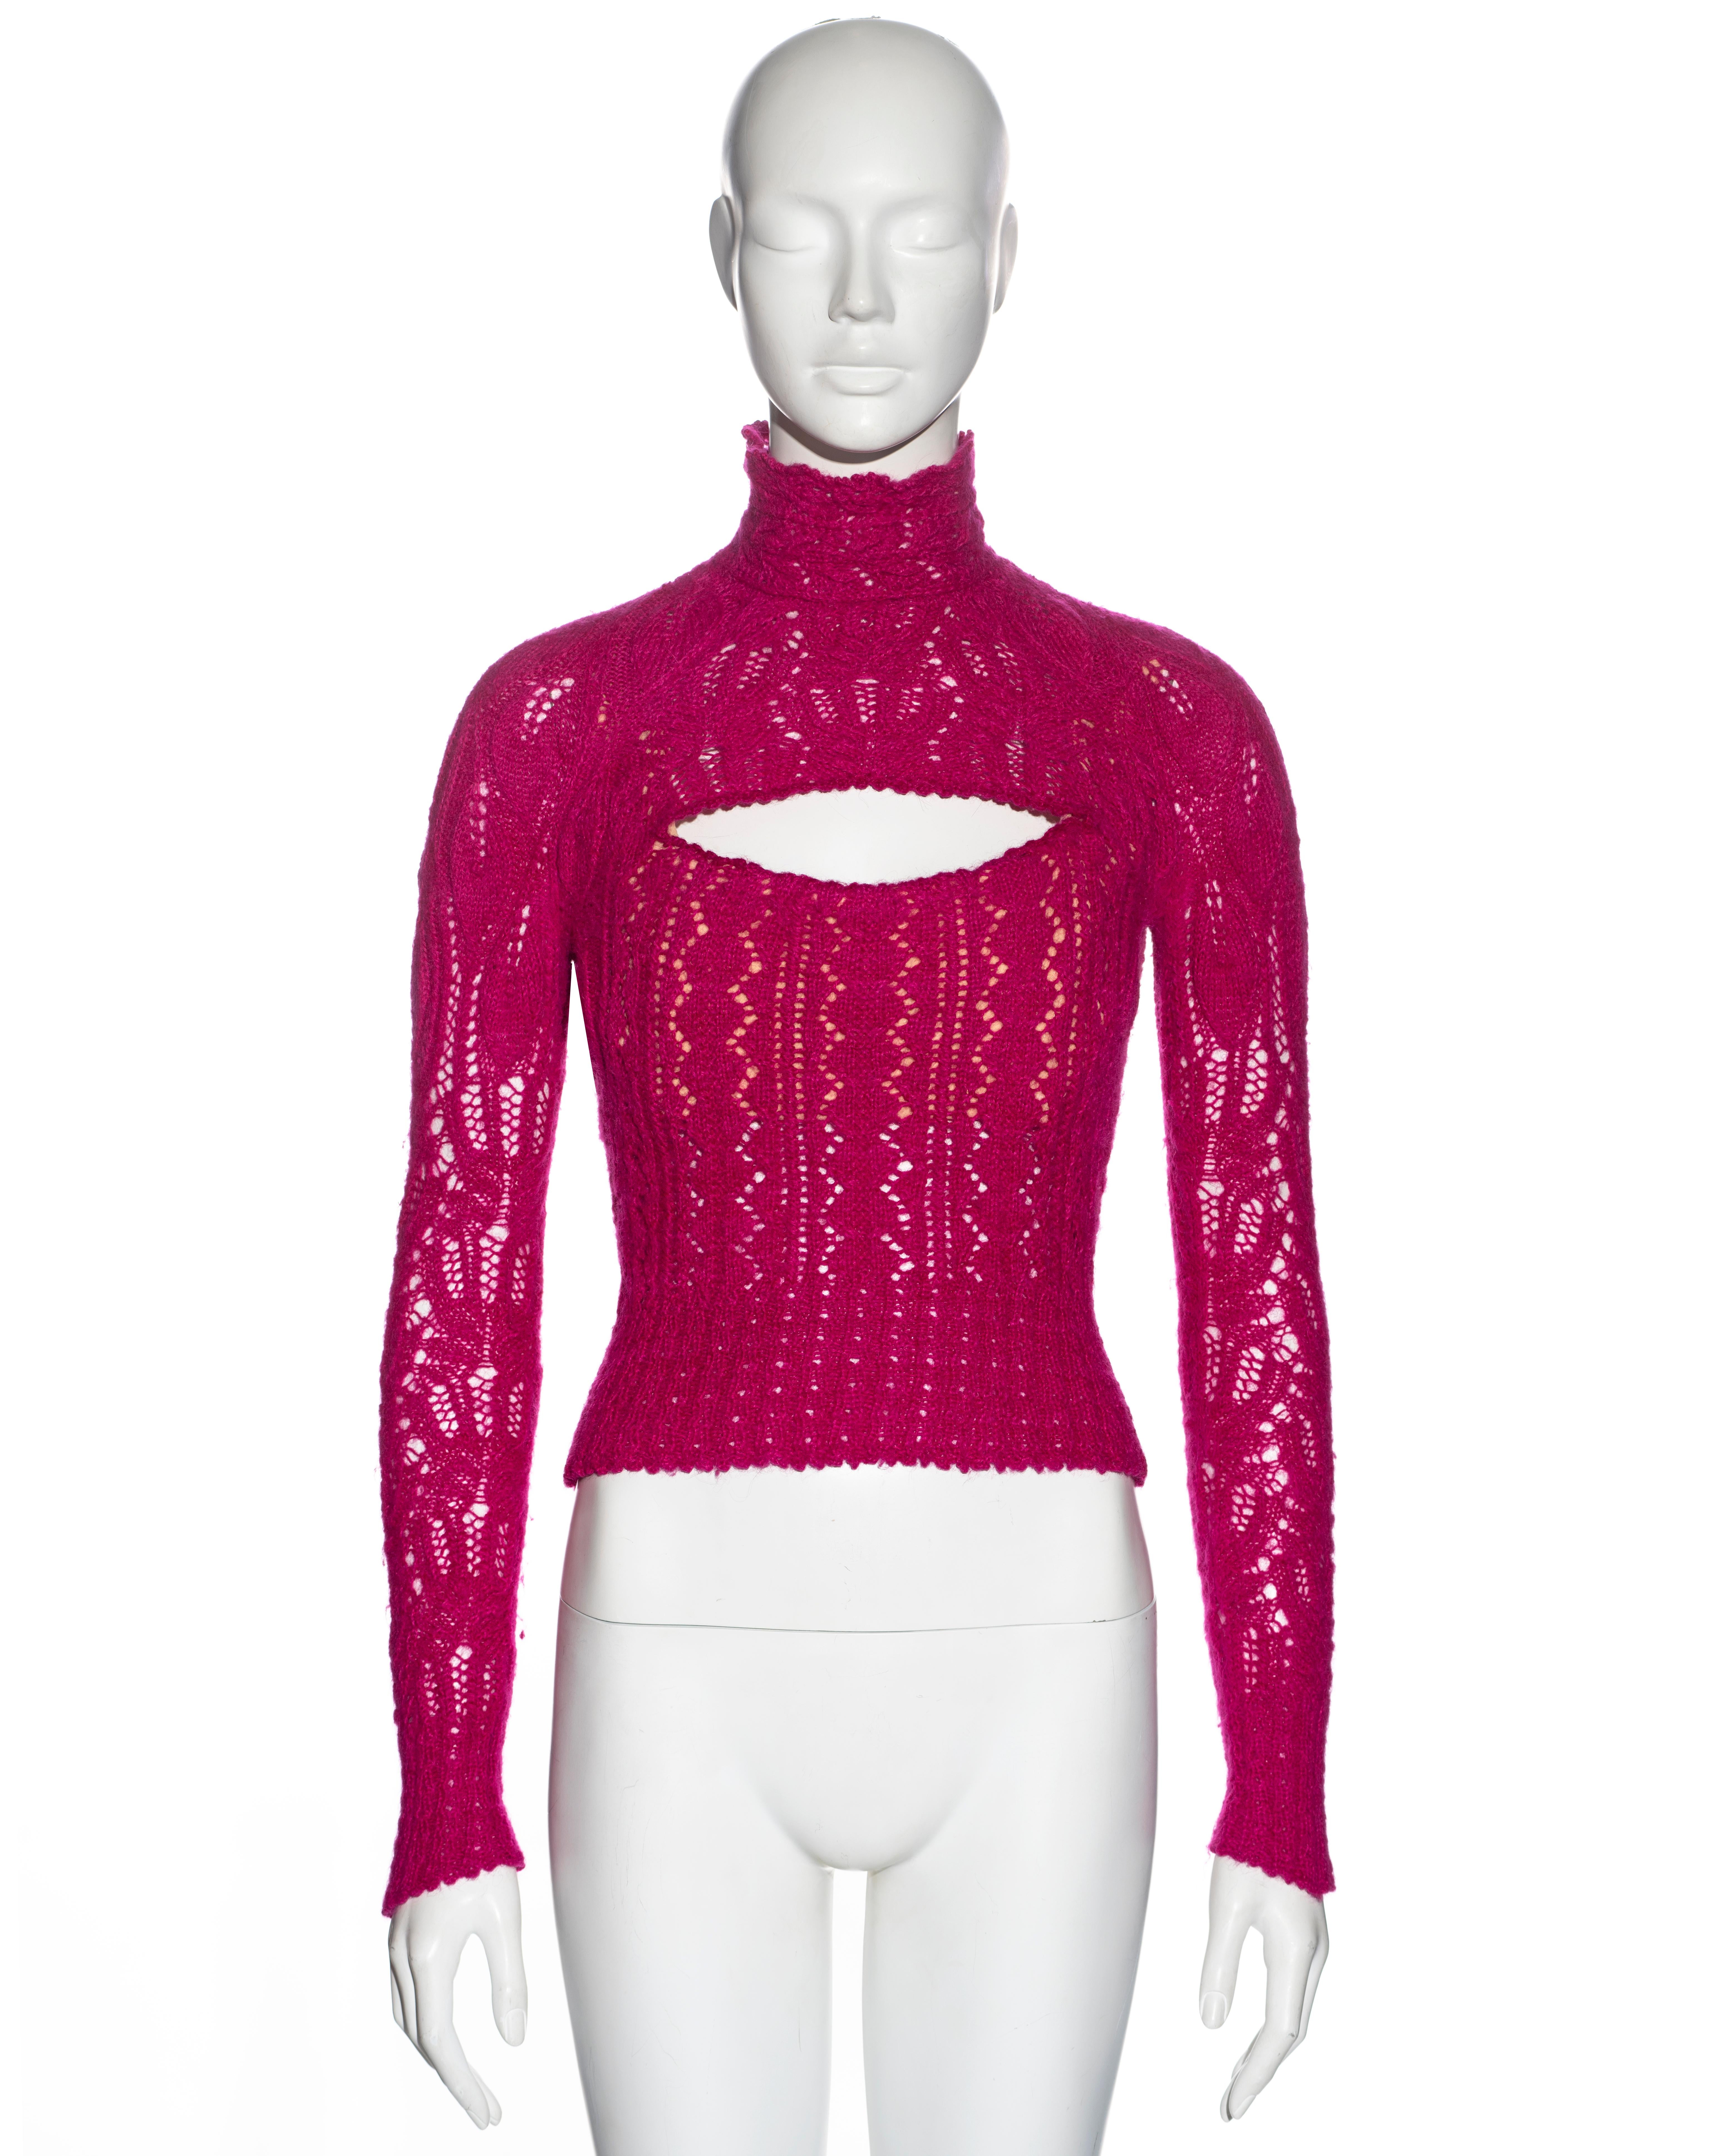 ▪ Vivienne Westwood rare knitted corset sweater 
▪ Sold by One of a Kind Archive 
▪ Constructed from knitted pink Angora 
▪ Nude internal corset producing a pronounced décolletage
▪ Opening at the breast line 
▪ High neck 
▪ Long fitted sleeves 
▪